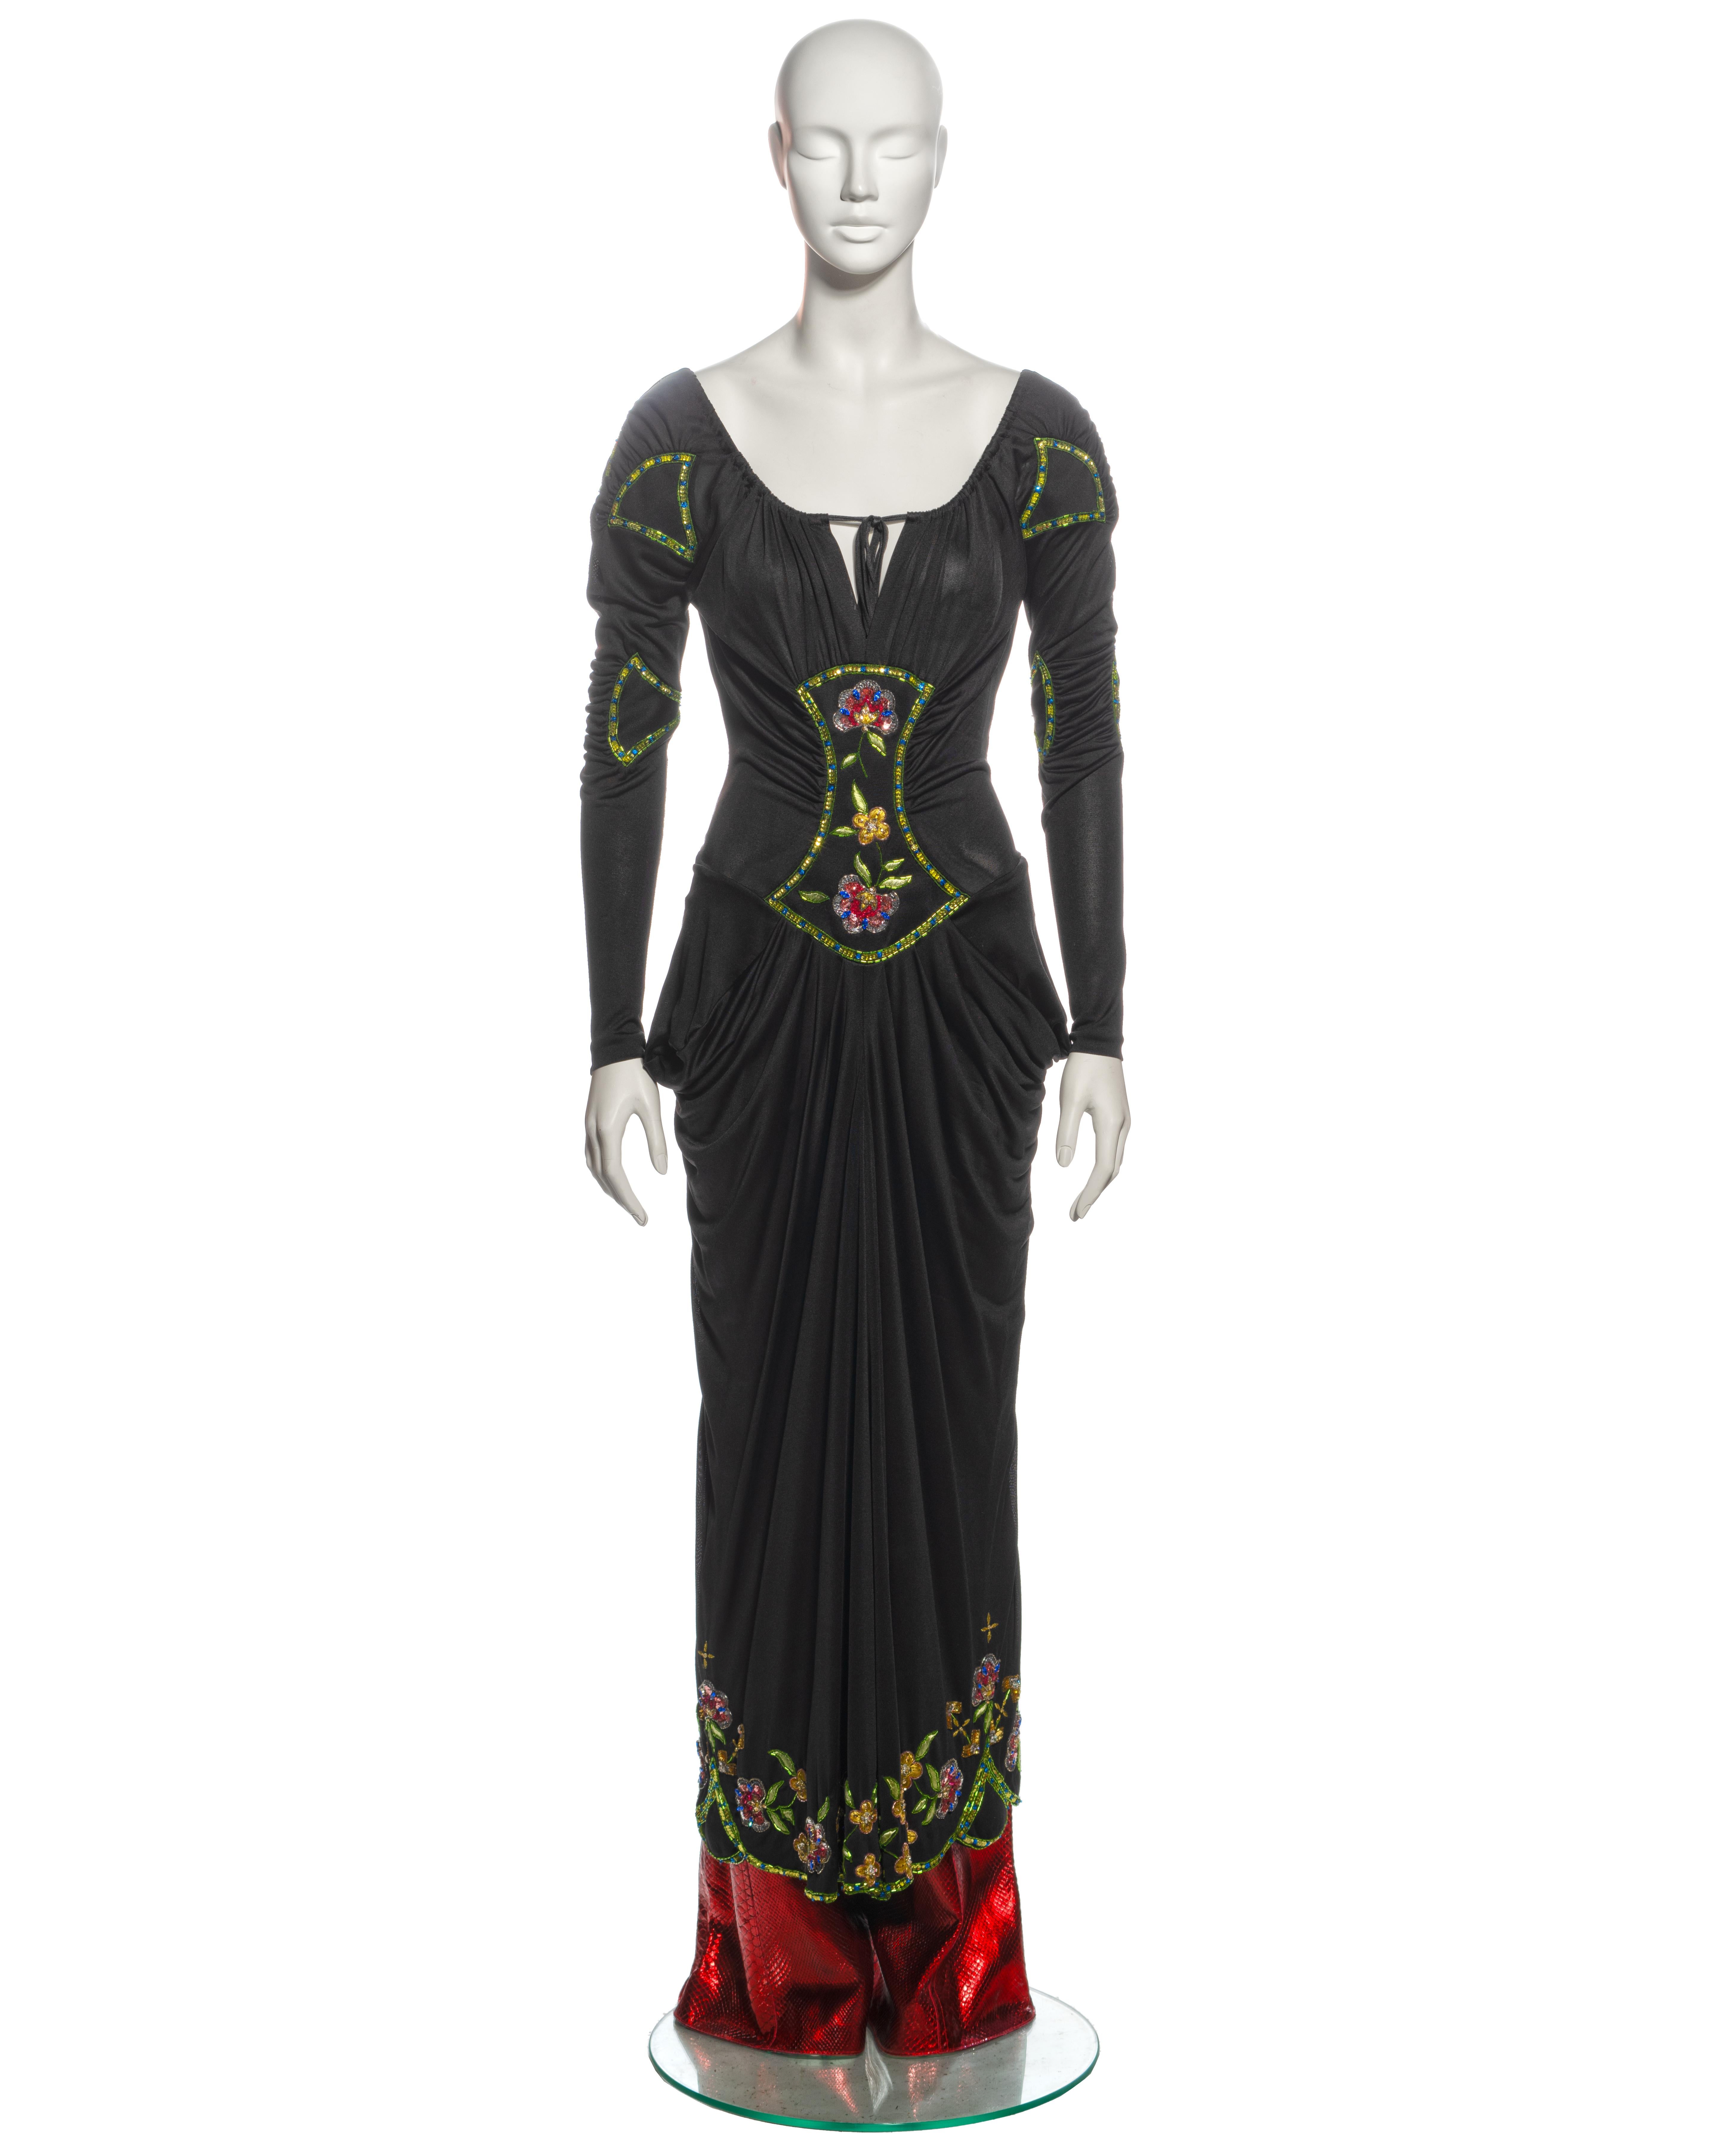 Christian Dior by John Galliano Black Viscose Embellished Draped Dress, ss 2002 For Sale 3